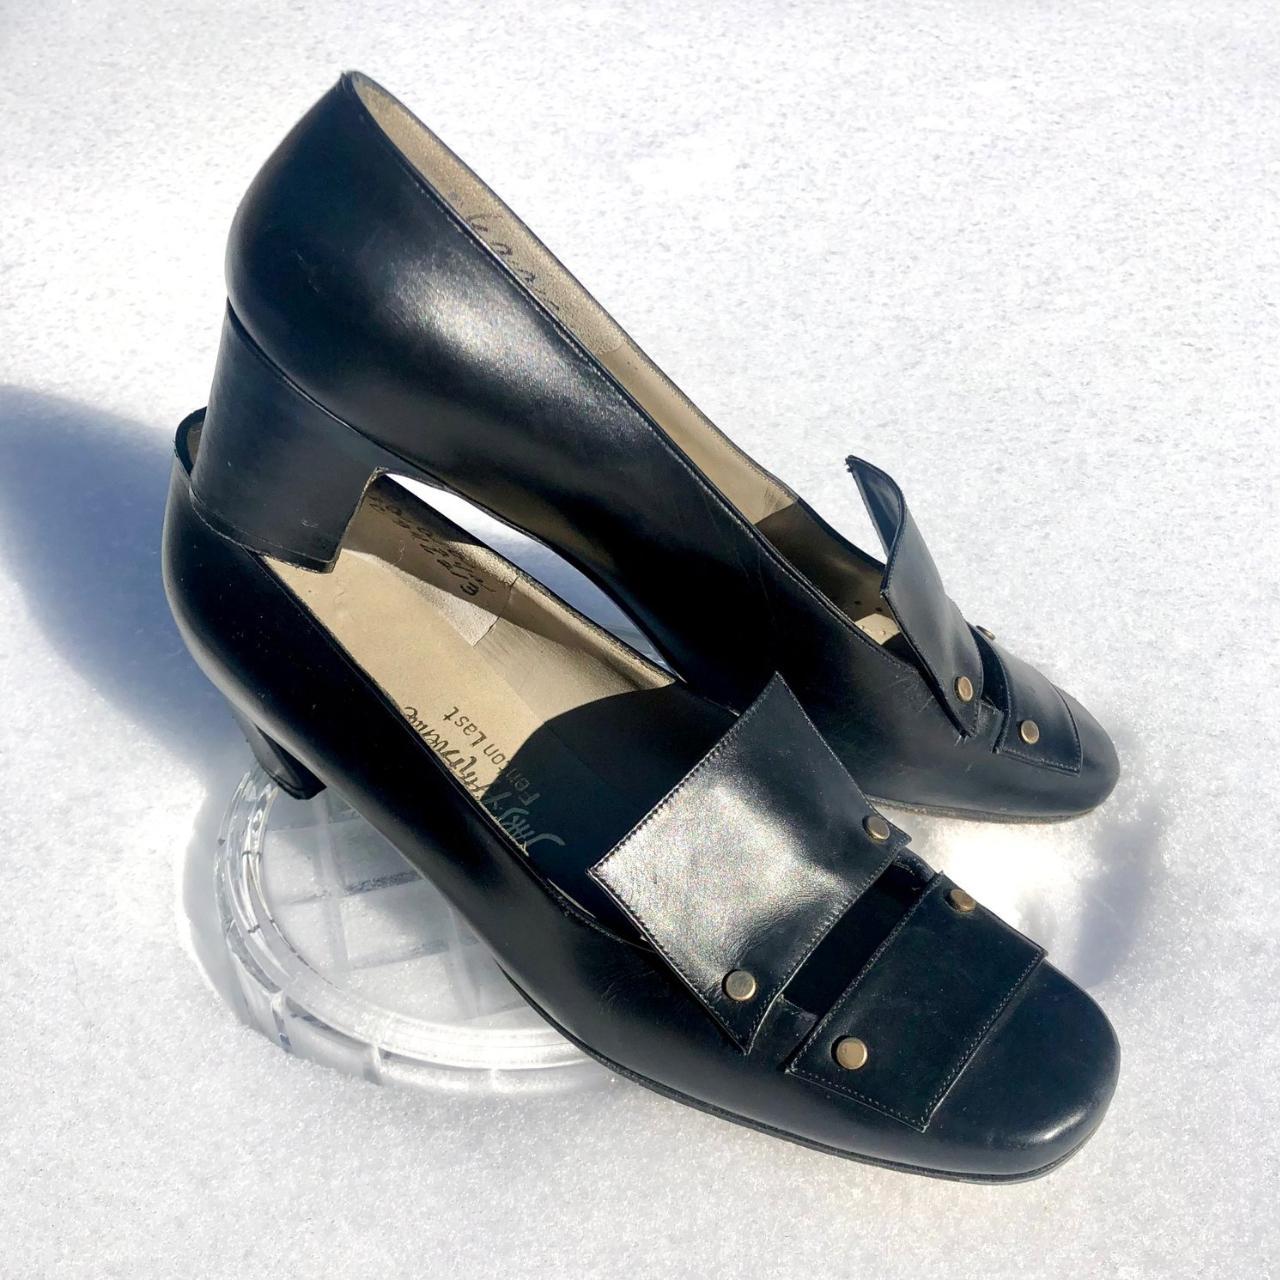 Shoes Fenton Last for Saks Fifth Avenue Black Patent with Beige